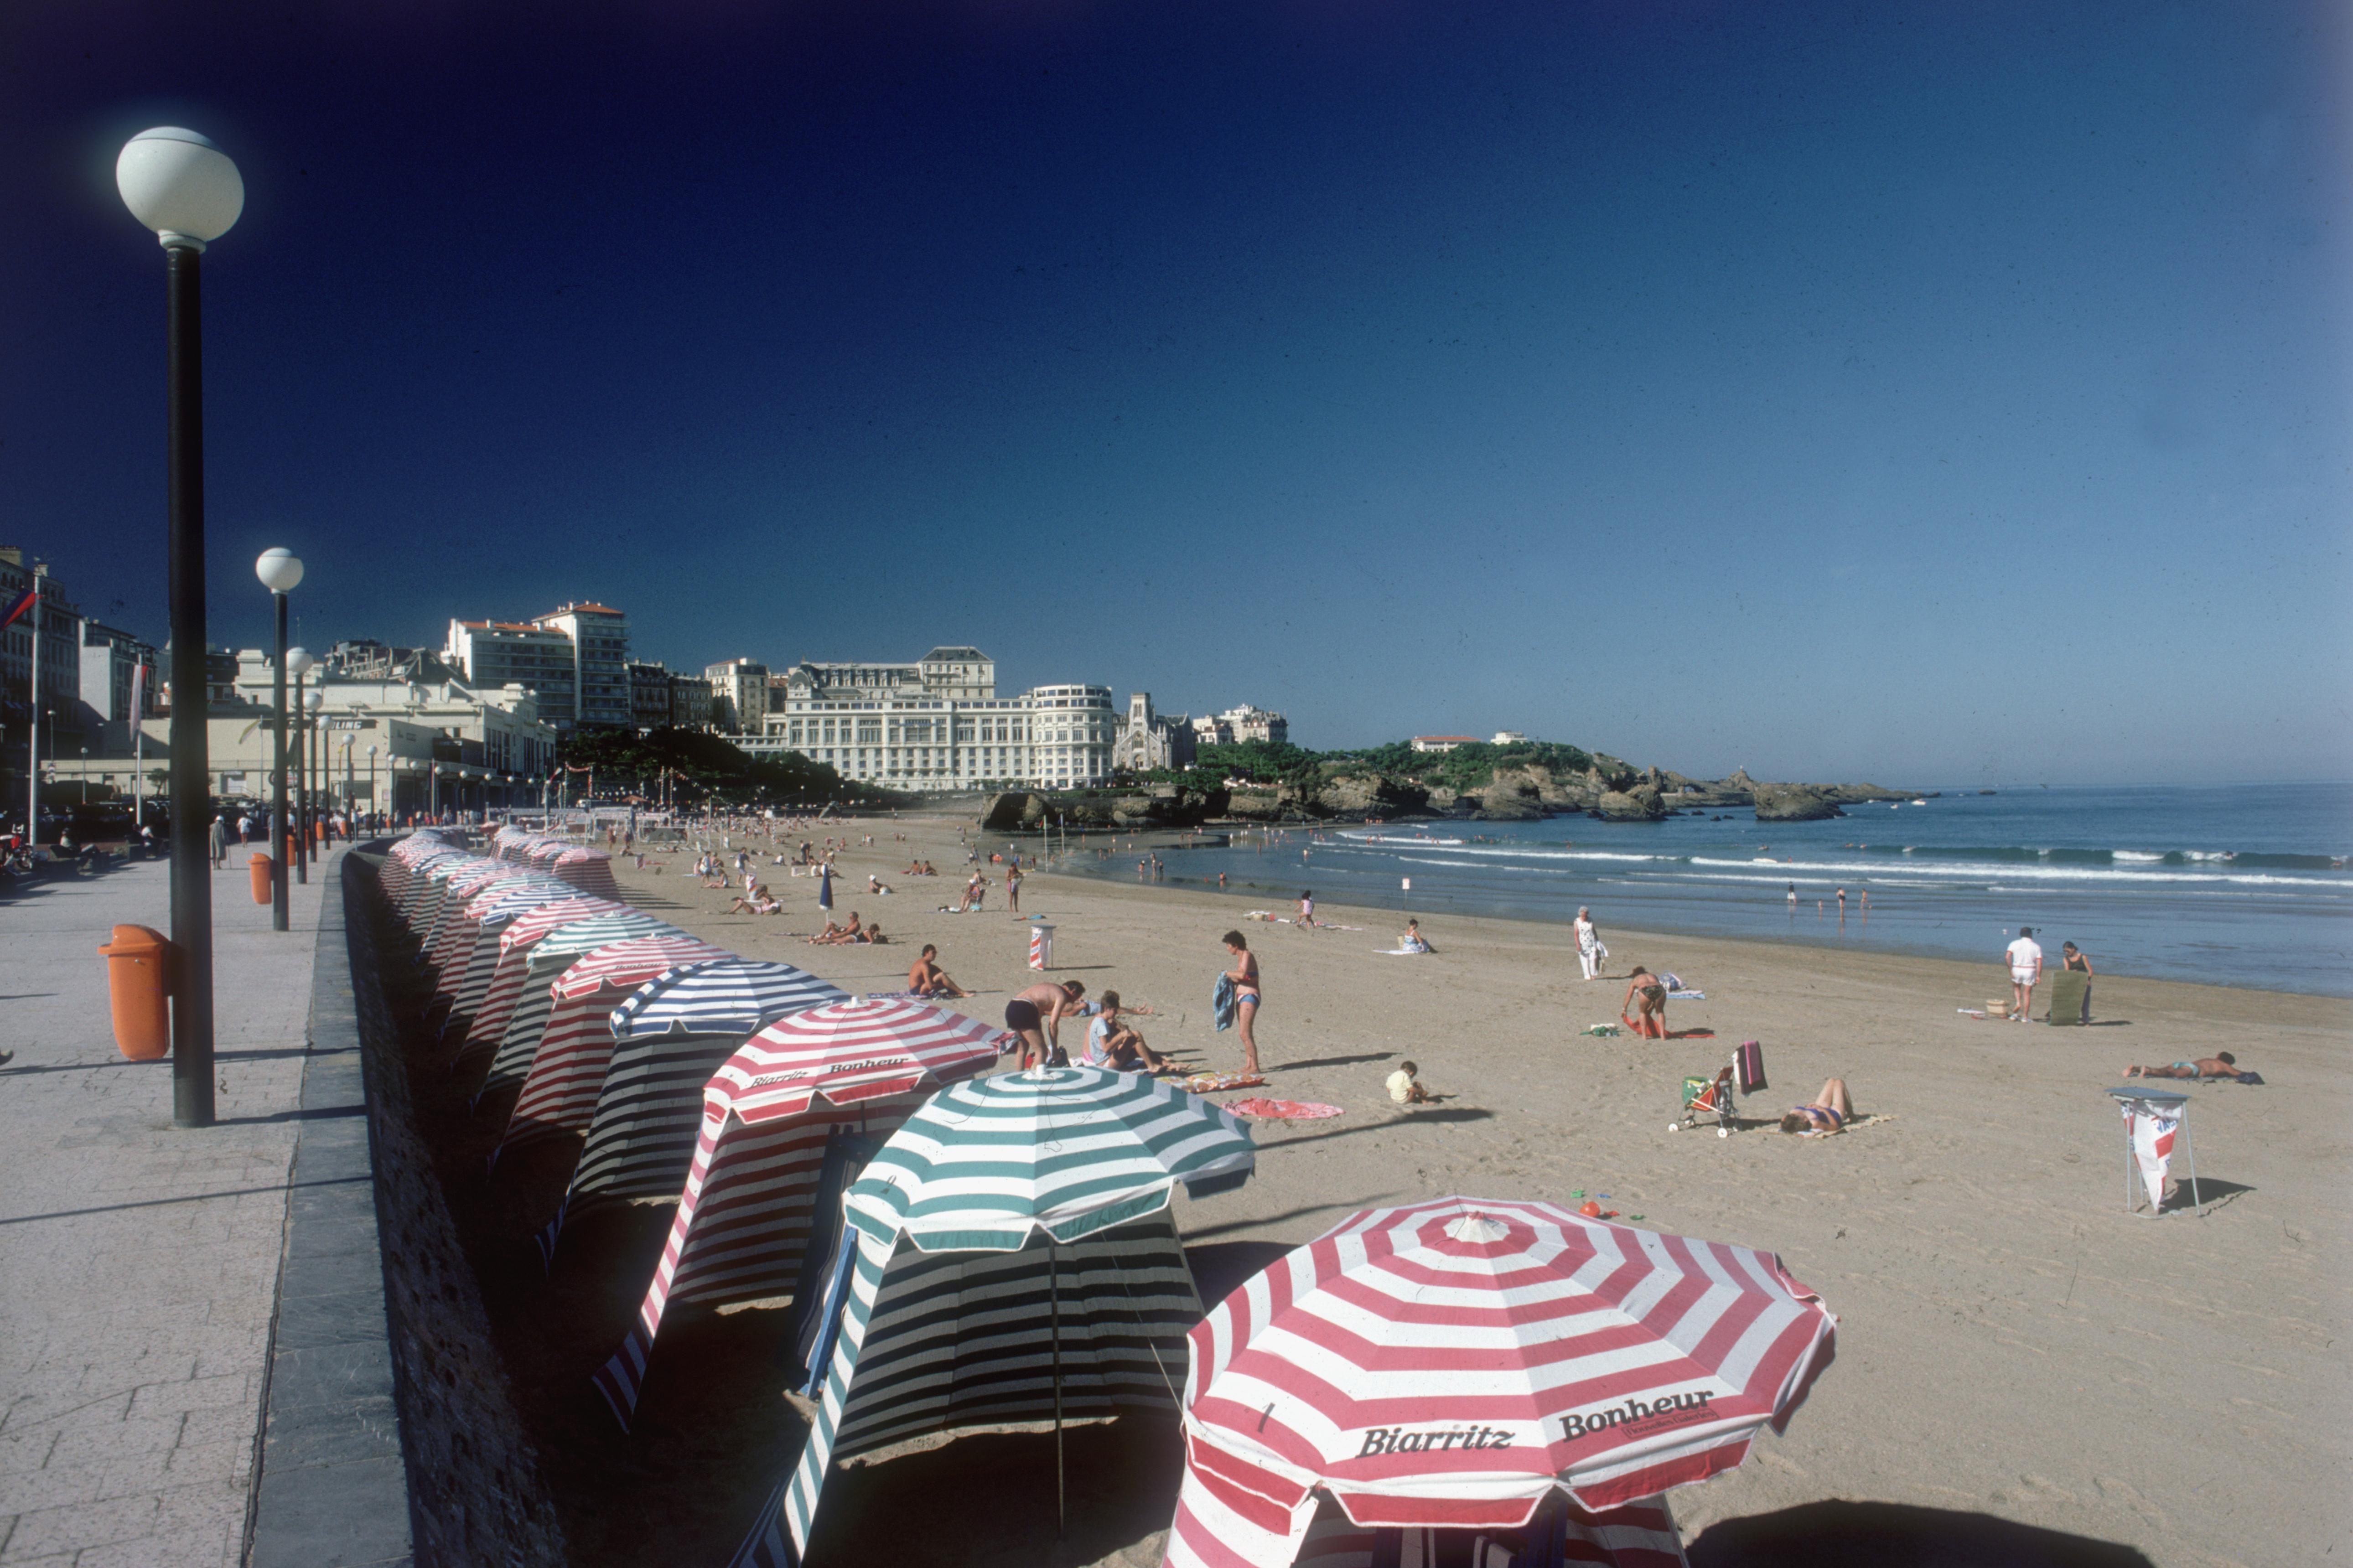 'The Grand Plage' 1985 Slim Aarons Limited Estate Edition Print 

1985, The Grand Plage, Biarritz, dominated by the Bellevue Casino and the Hotel du Palais, and the Bay of Biscay beyond. 

Produced from the original transparency
Certificate of